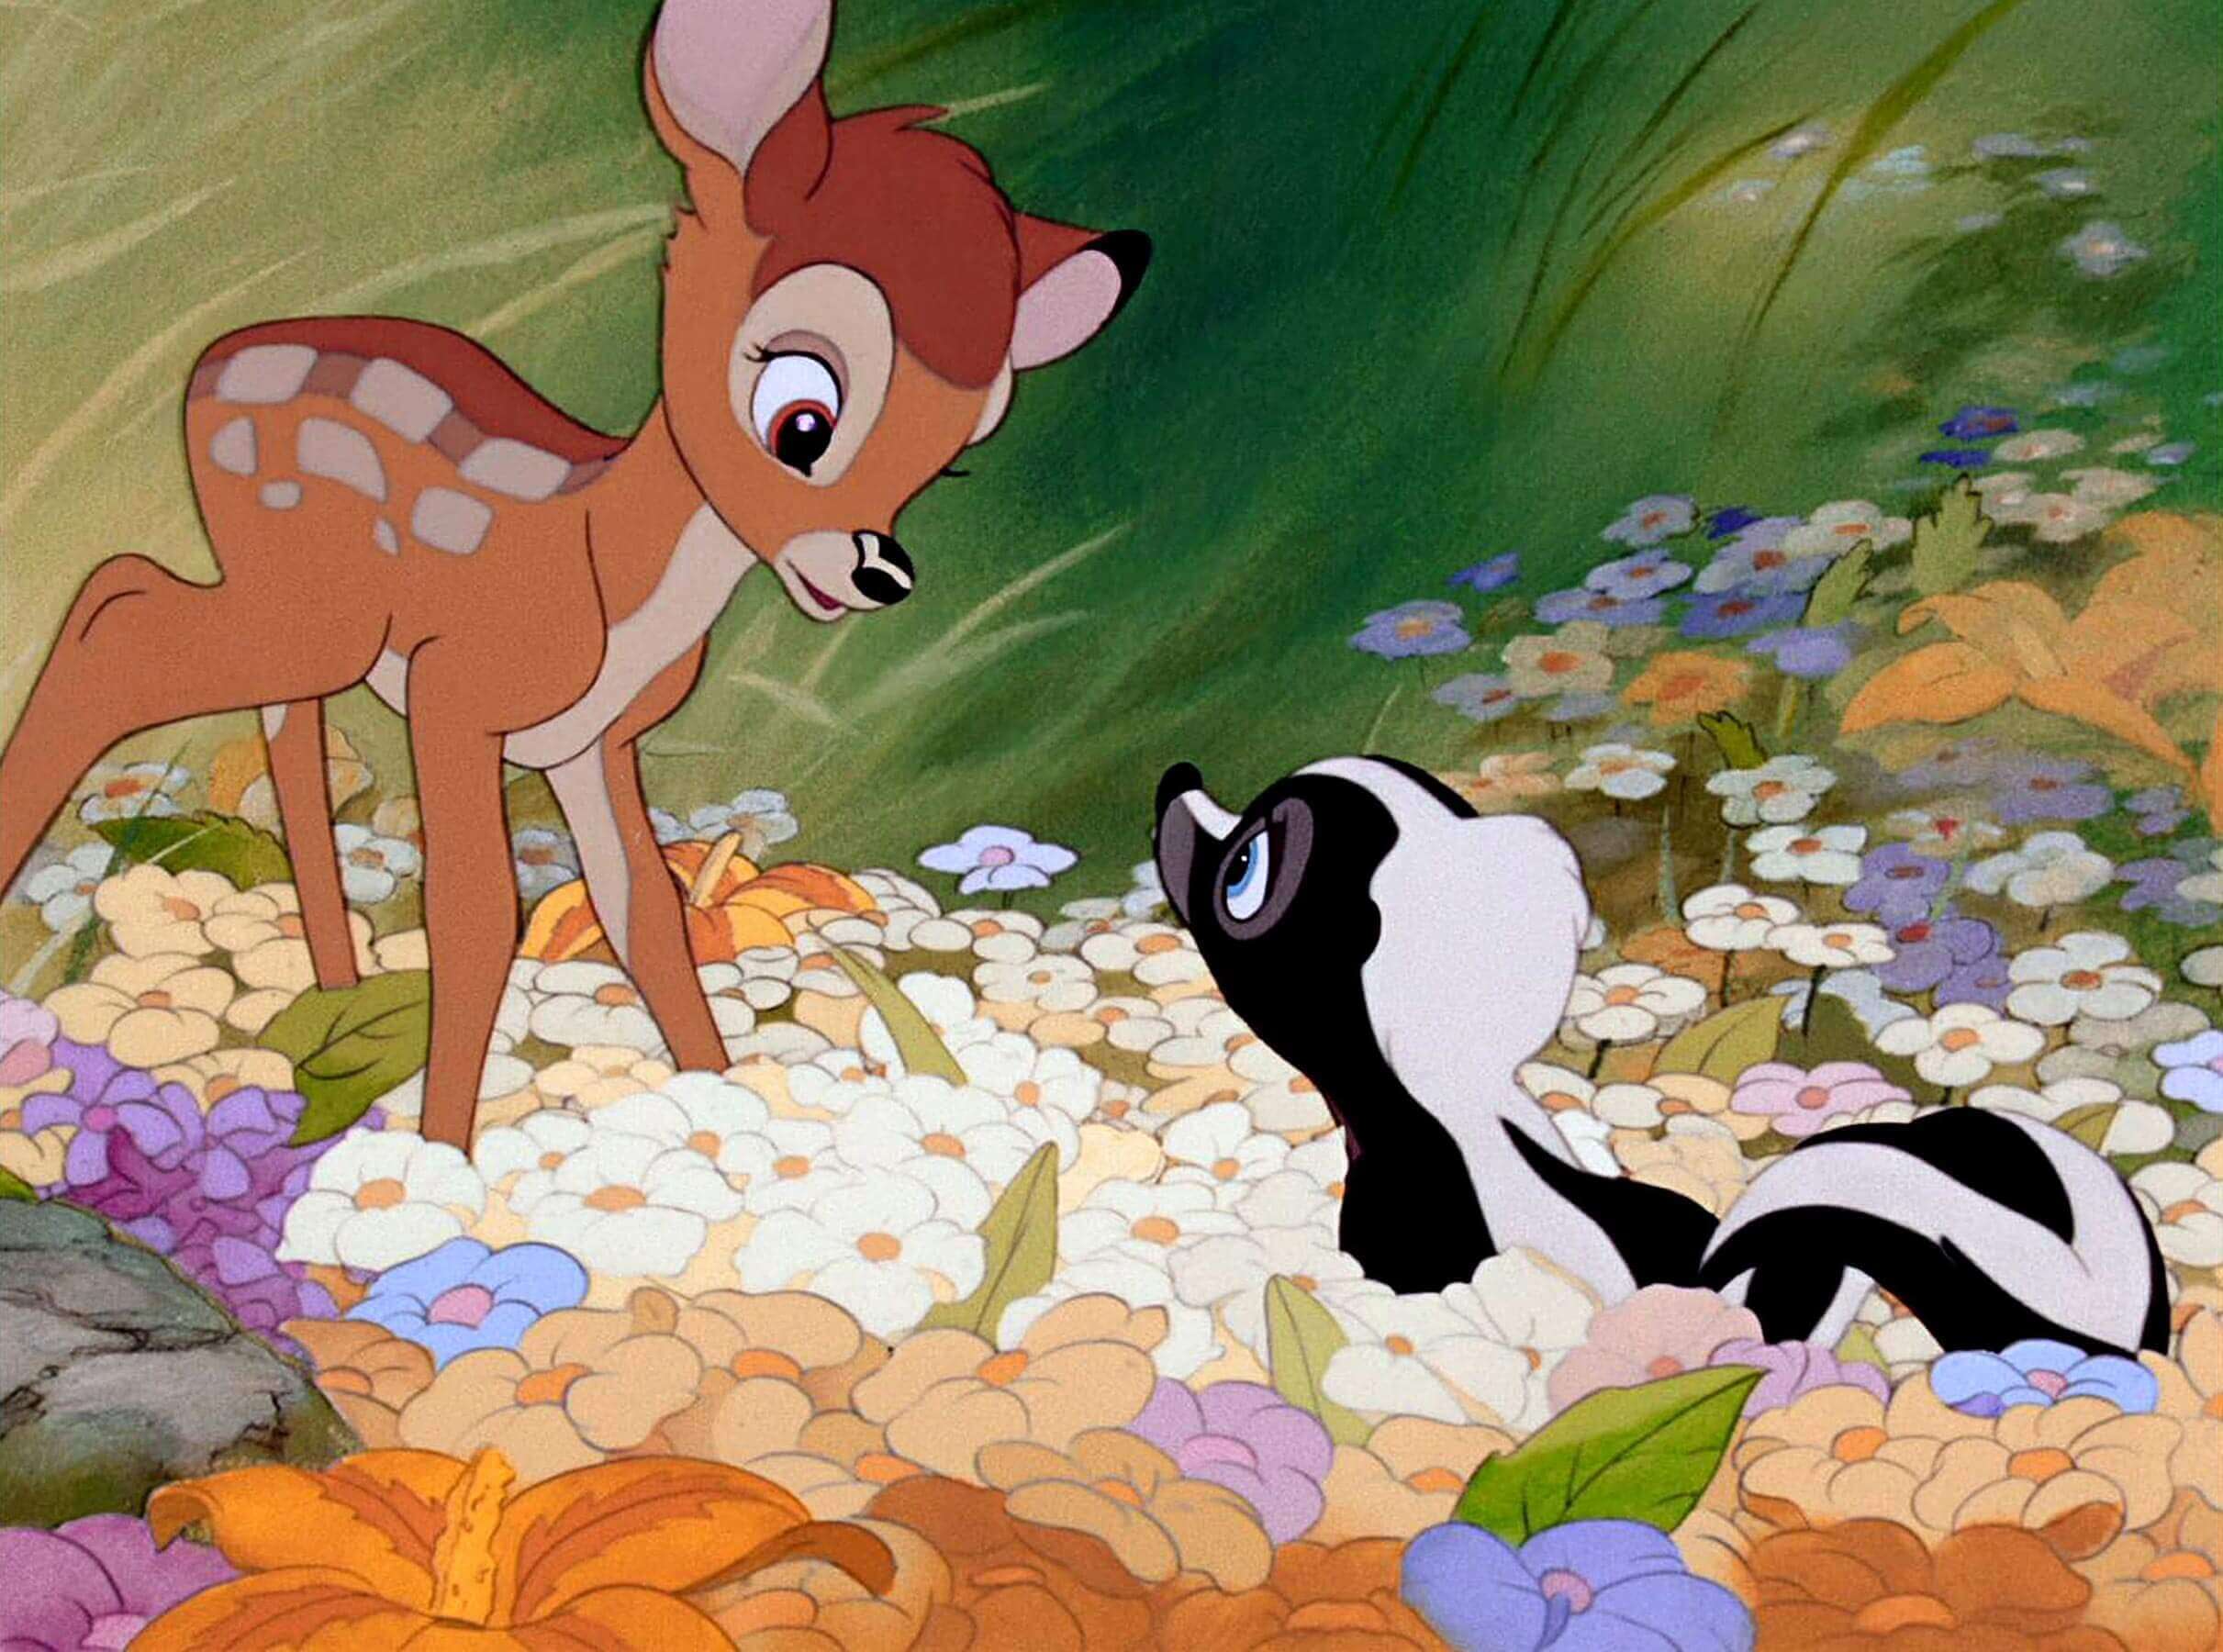 Bambi Remake in Works